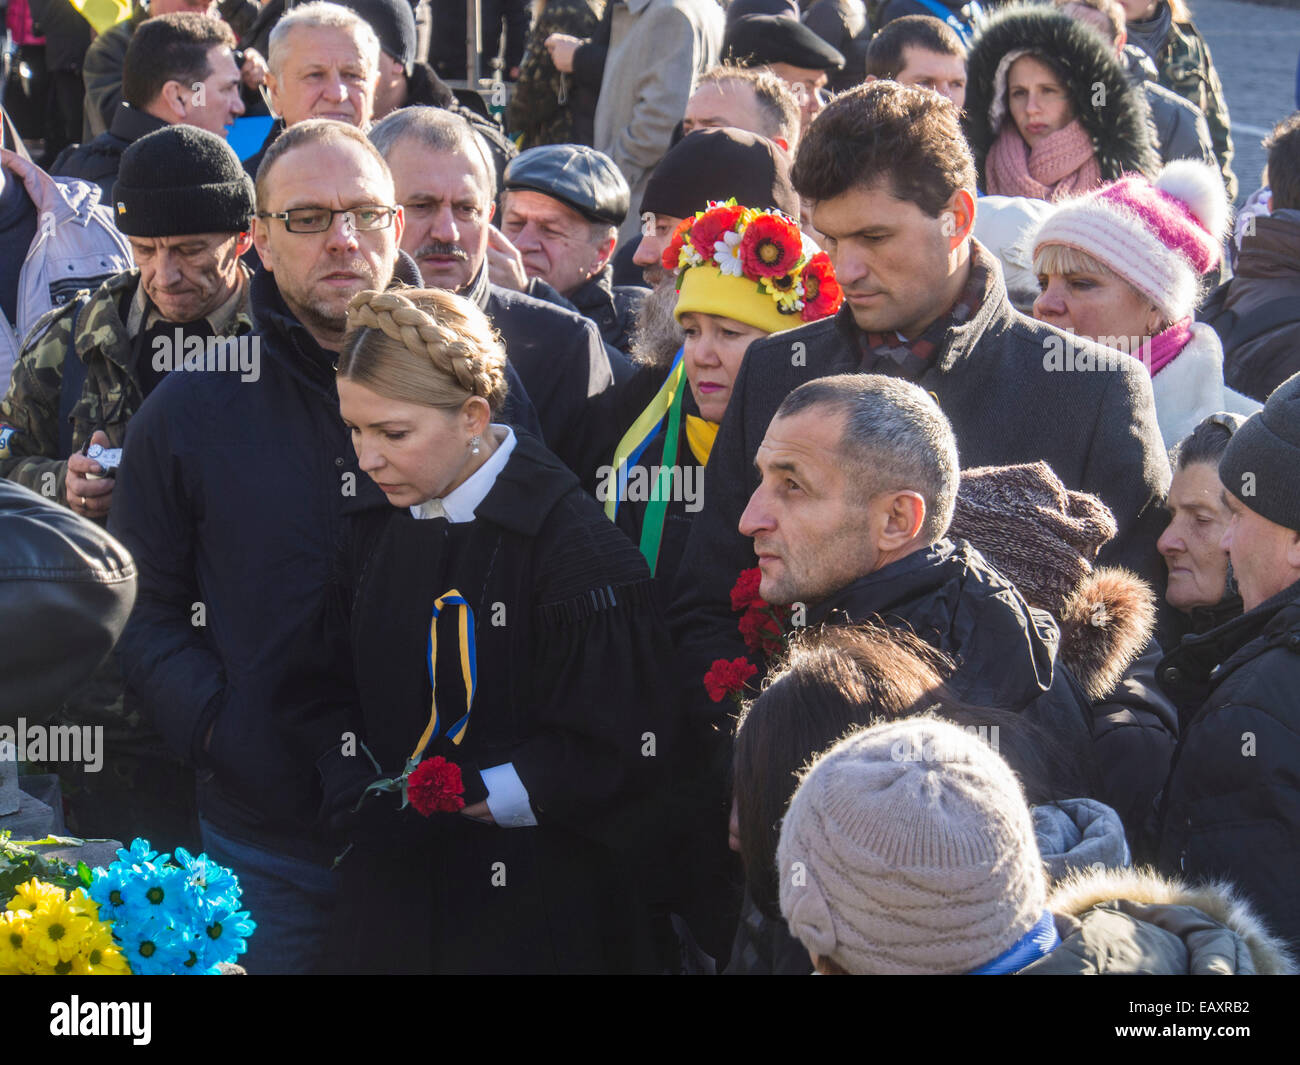 Kiev, Ukraine. 21st Nov, 2014. Yulia Tymoshenko lays flowers heroes Hundreds of Heaven -- Ukrainians celebrated the anniversary of Euromaidan, which was a wave of demonstrations and civil unrest in Ukraine, which began on 21 November 2013 with public protests in Independence Square in Kiev, demanding closer European integration. Credit:  Igor Golovnov/Alamy Live News Stock Photo